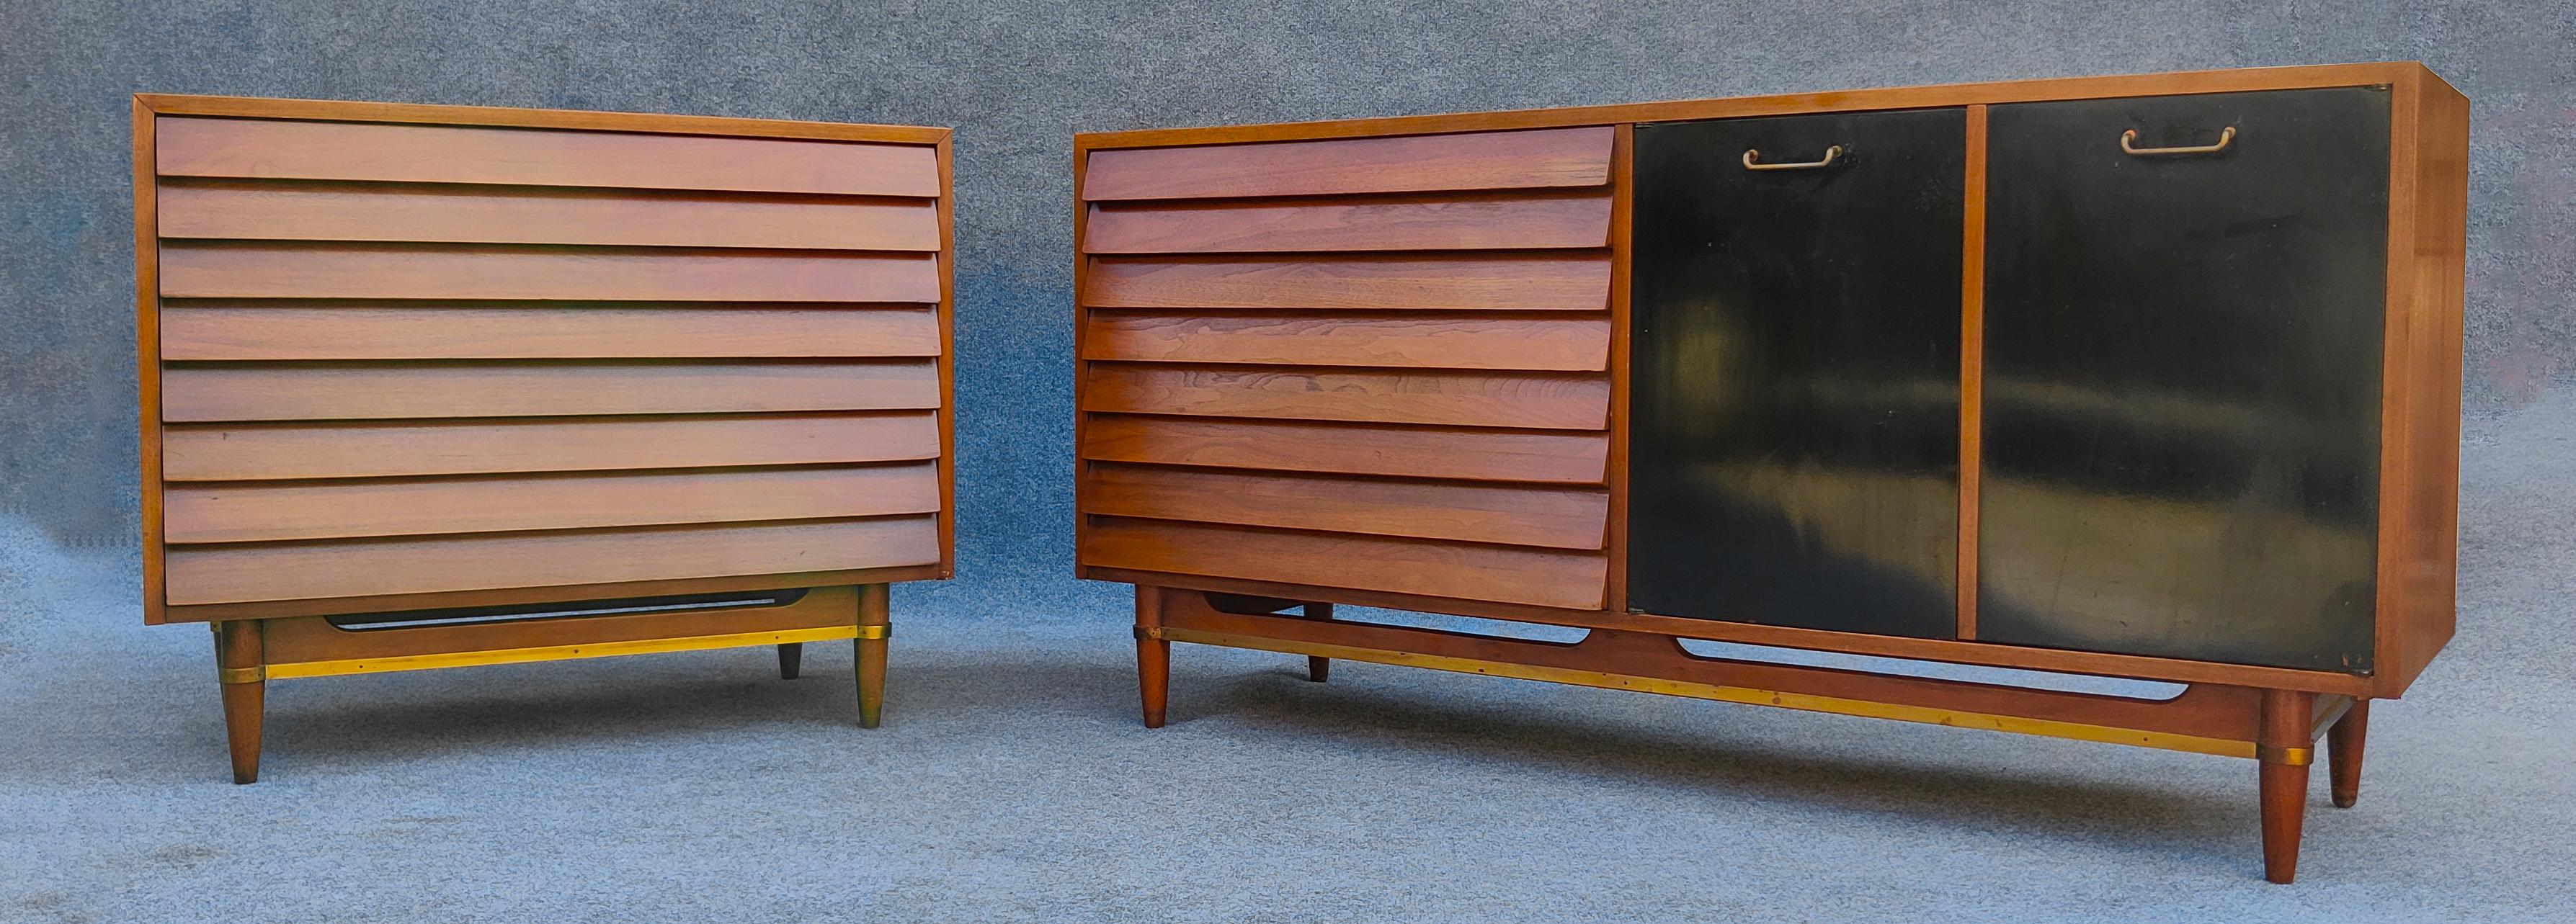 This stylish and cool set of Mid Century Modern dressers were designed by Merton Gershun for American of Martinsville. Featuring one large dresser and a small one, they each feature three large louvered drawers. The long dresser has two black doors